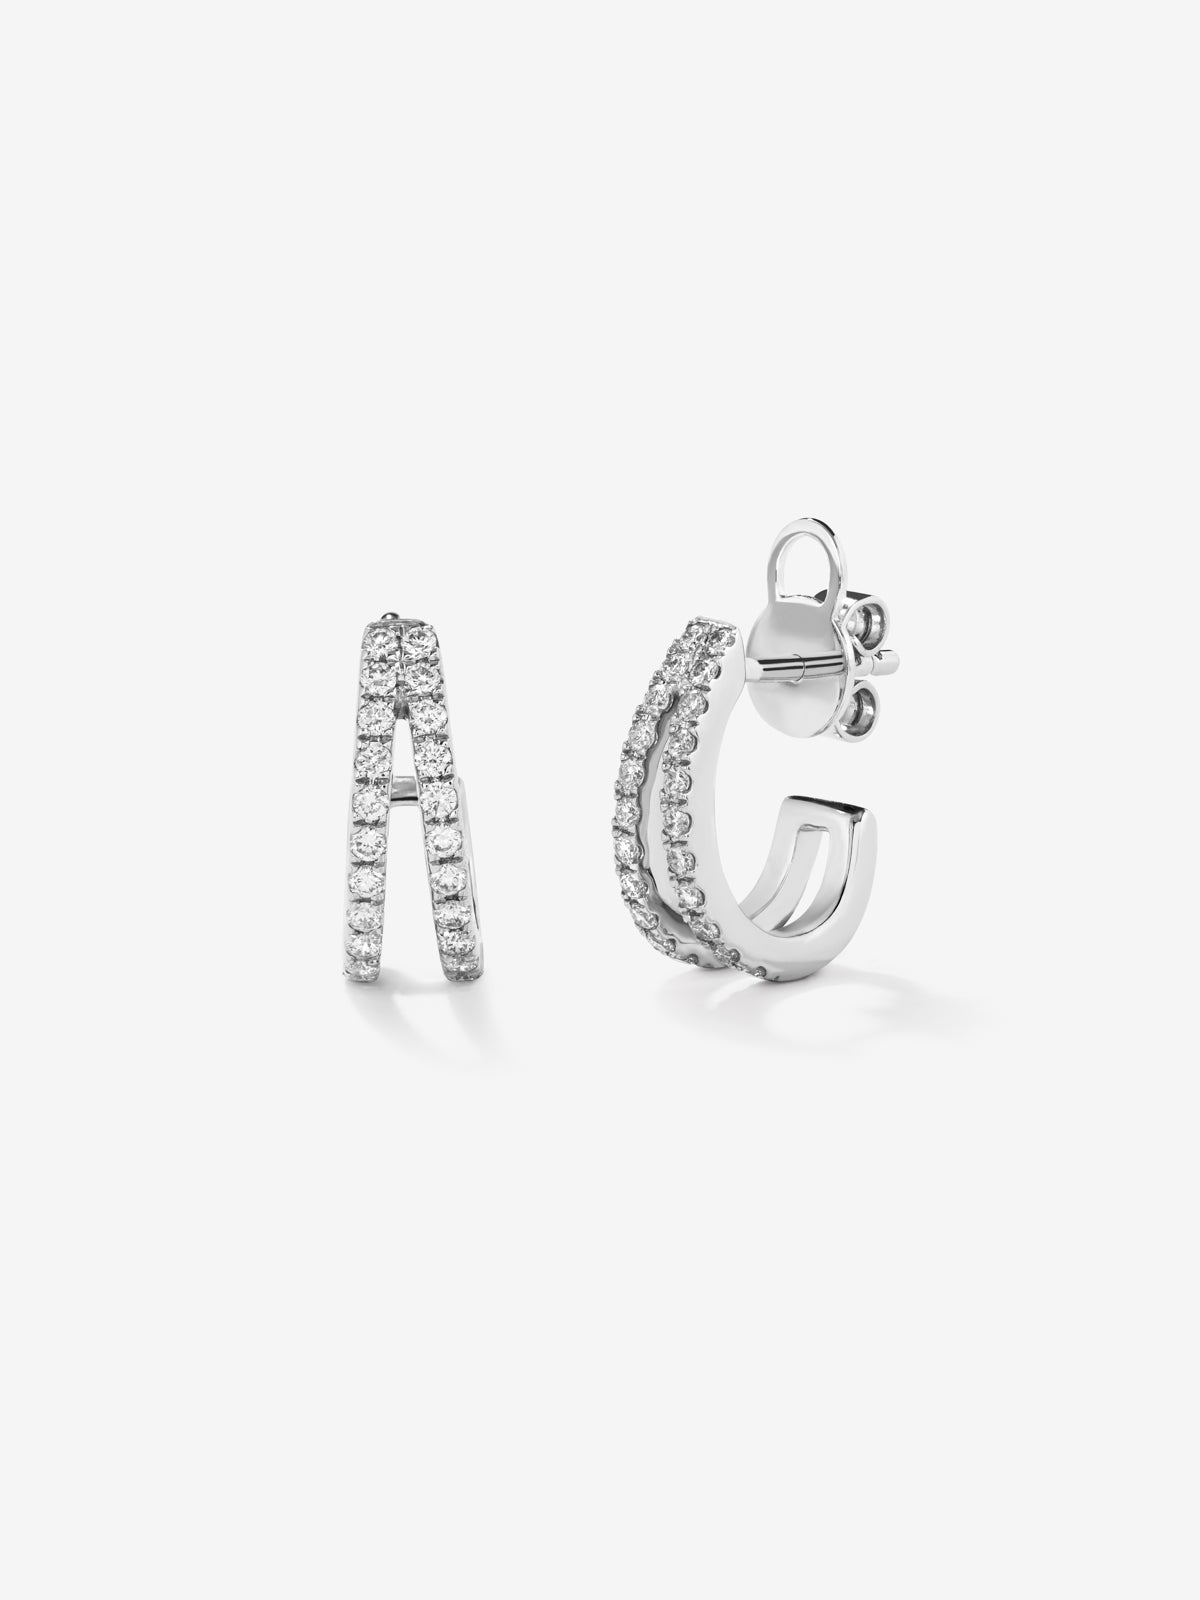 18K white gold double hoop earrings with 44 brilliant-cut diamonds with a total of 0.41 cts